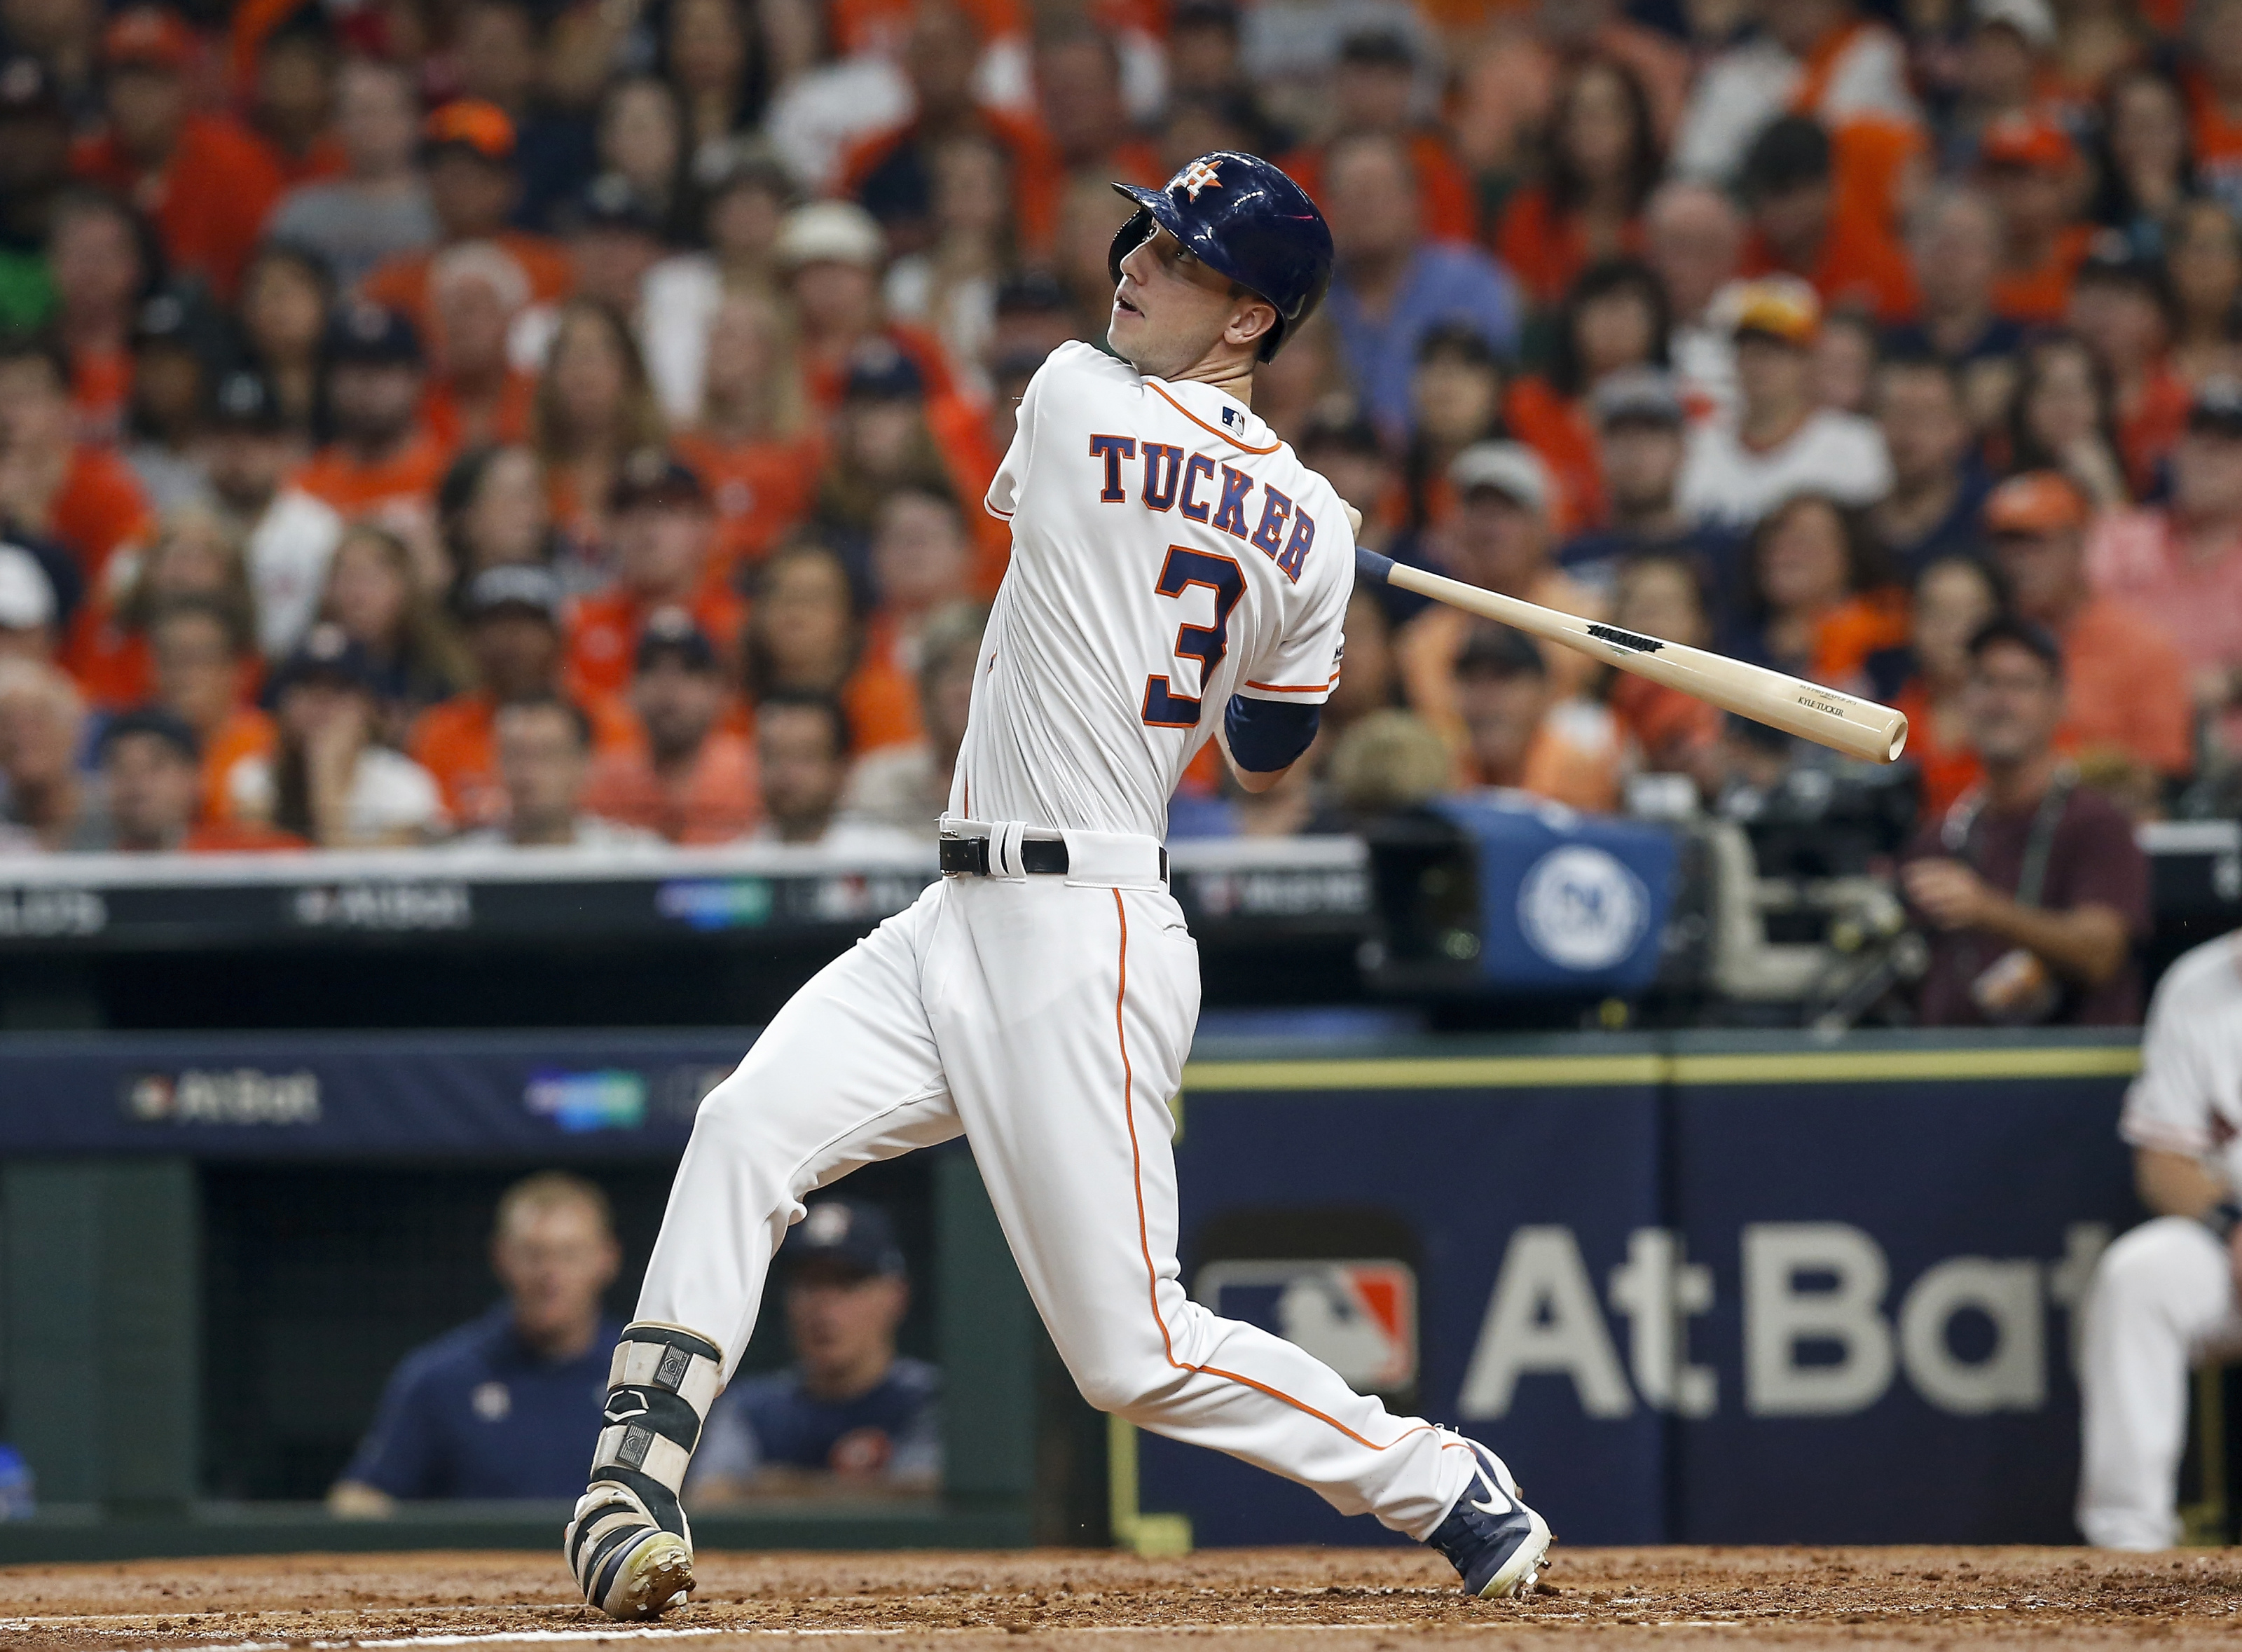 Why MLB's pitch clock led Astros' Kyle Tucker to ditch barehanded hitting -  The Athletic